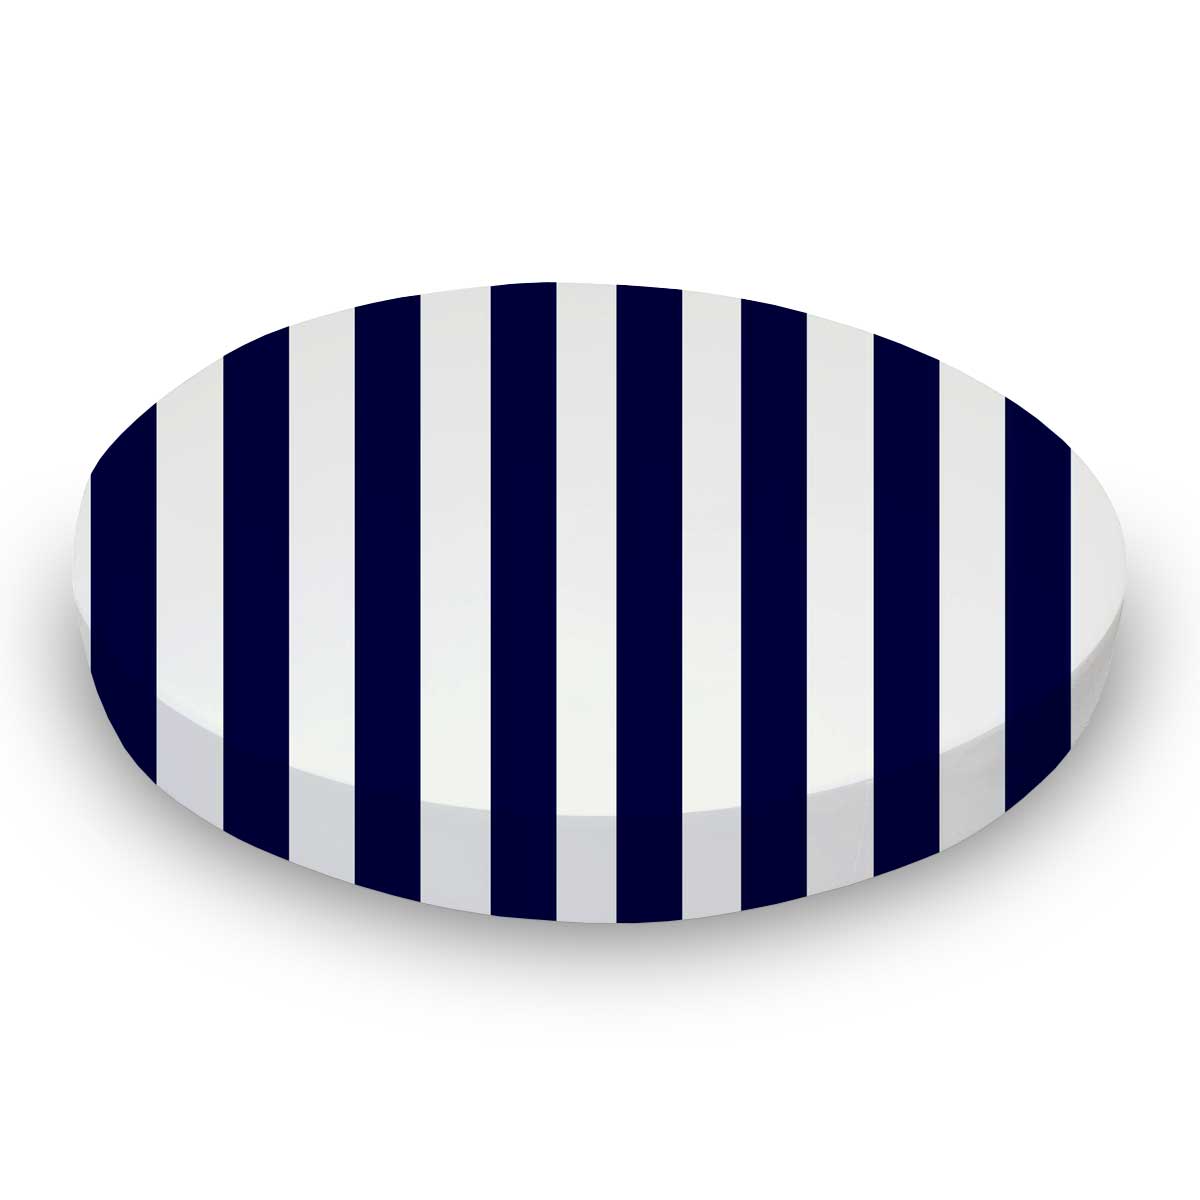 Oval (stokke Mini) - Primary Navy Stripe Woven - Fitted Oval